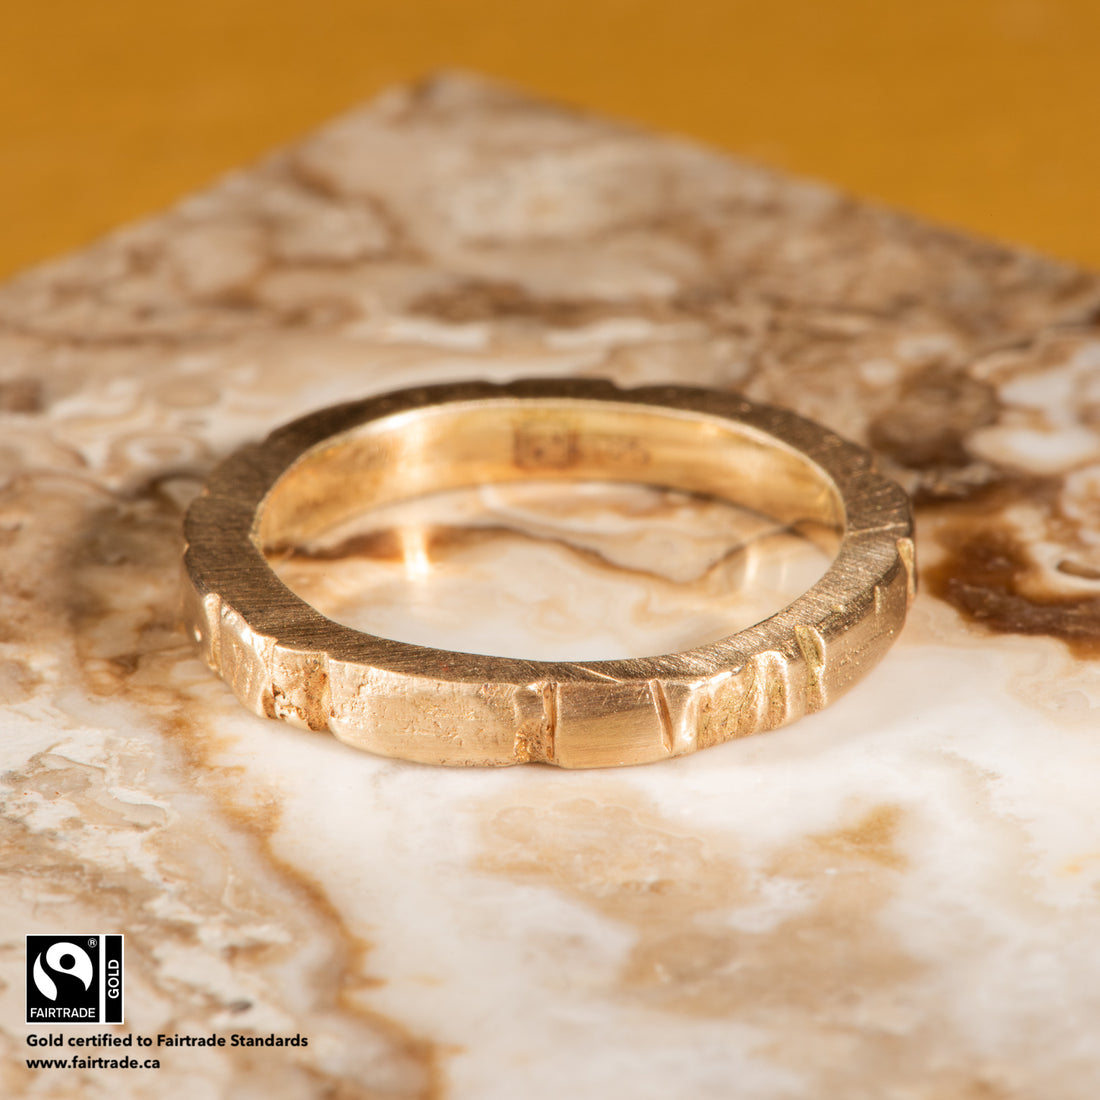 Fairtrade Gold and Precious Metals: The Power of Ethical Mining and Sustainable Jewelry